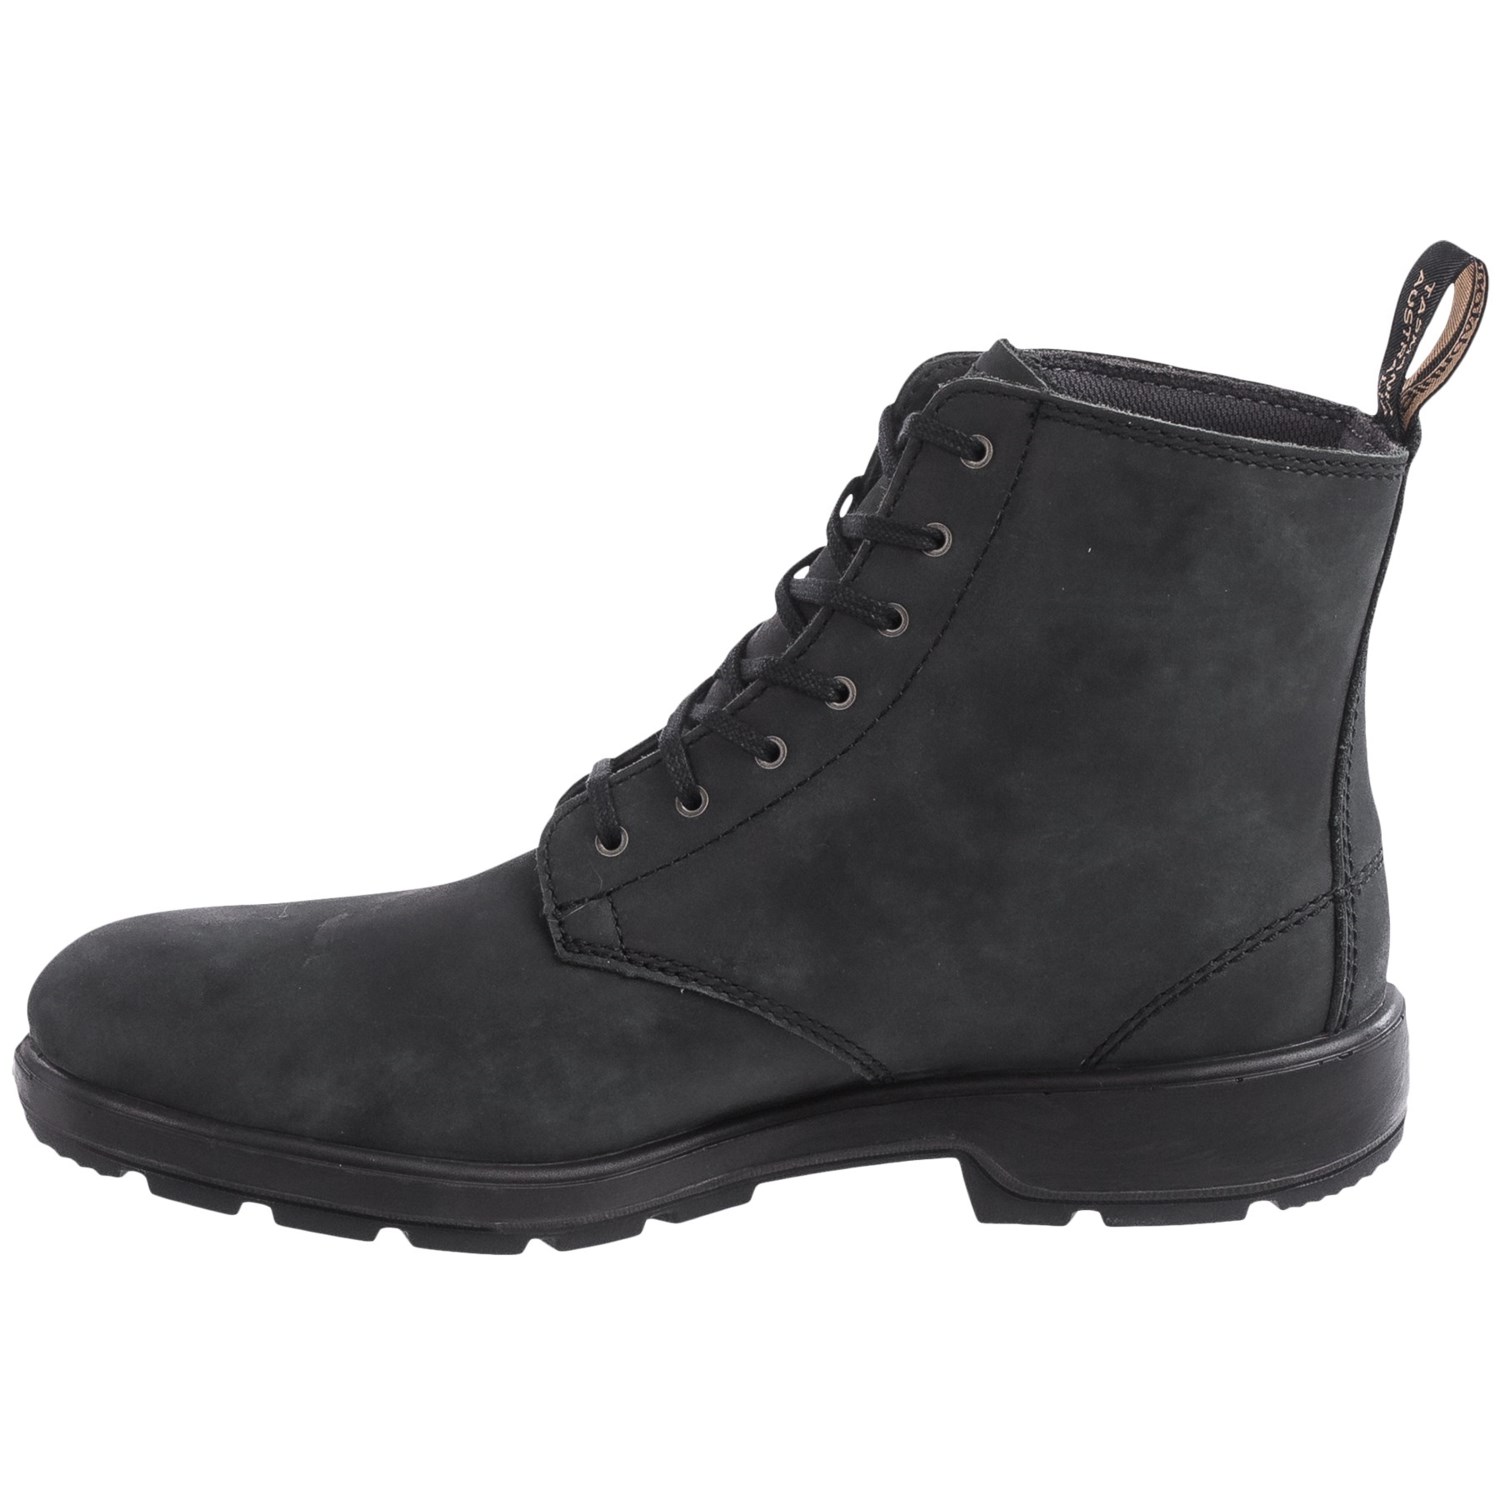 Blundstone 1451 Leather Lace-Up Boots (For Men and Women) - Save 55%